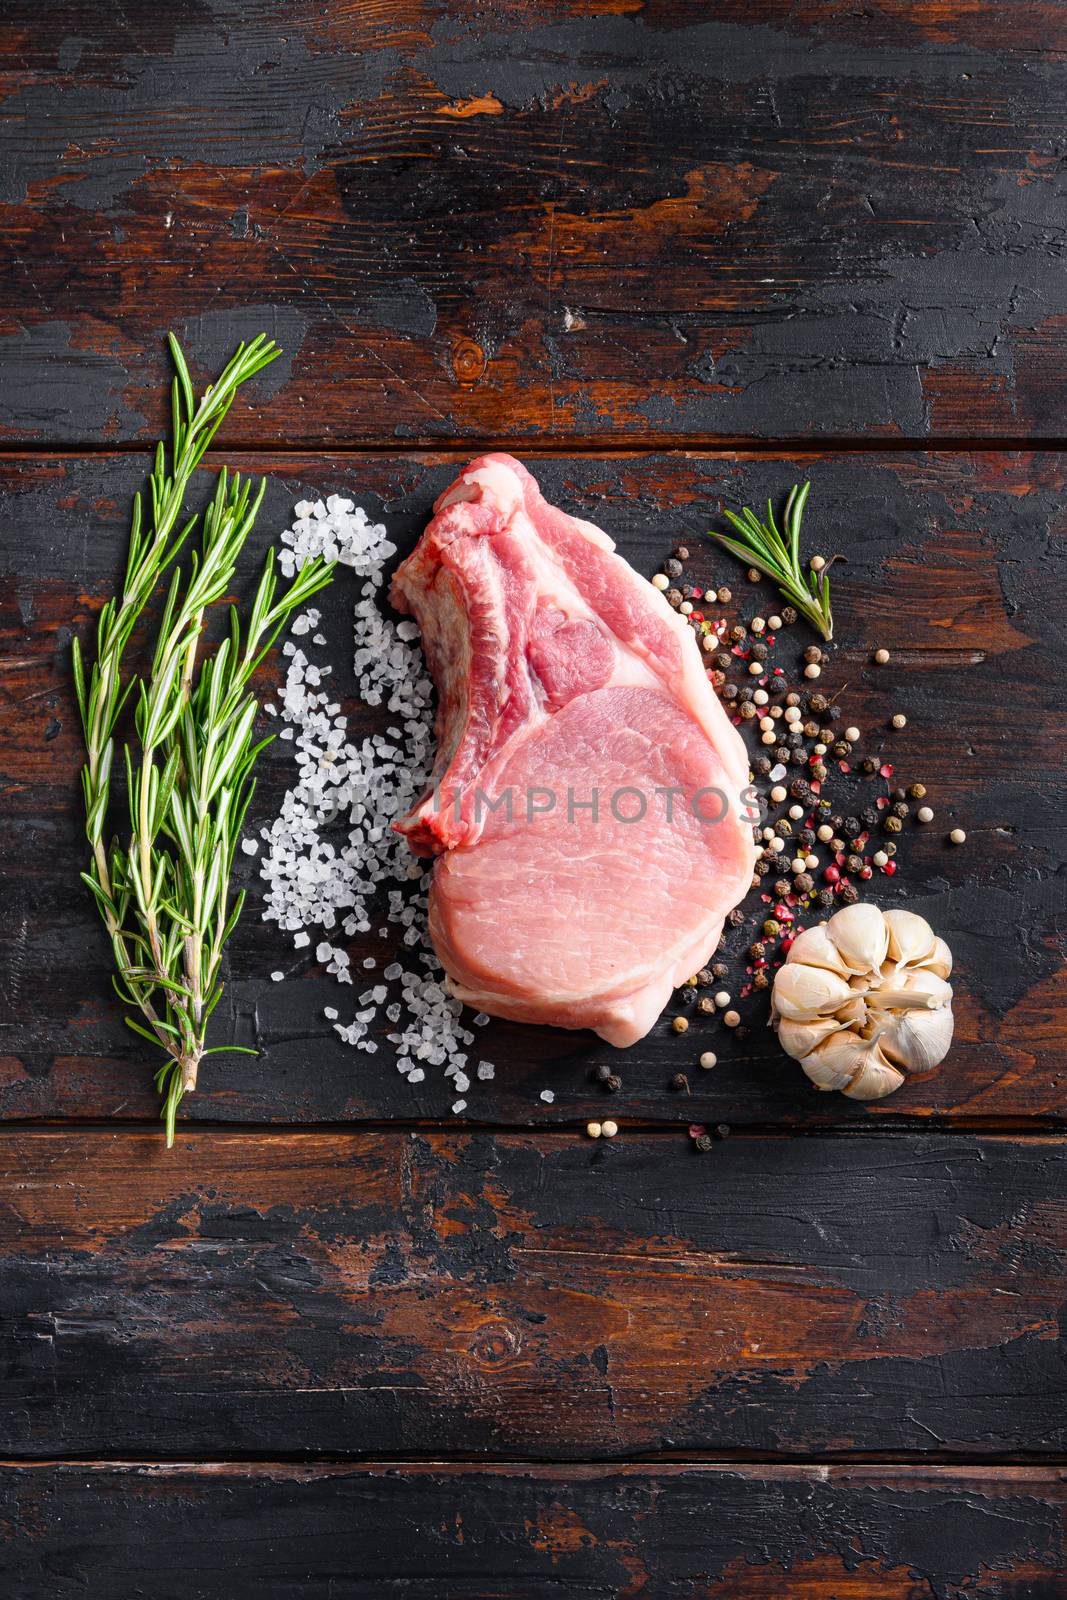 Raw meat on dark wood rustic background. Bio organic farm pork steak with herbs and spices. Cooking meat. Copy space. Top view vertical space for price or text by Ilianesolenyi